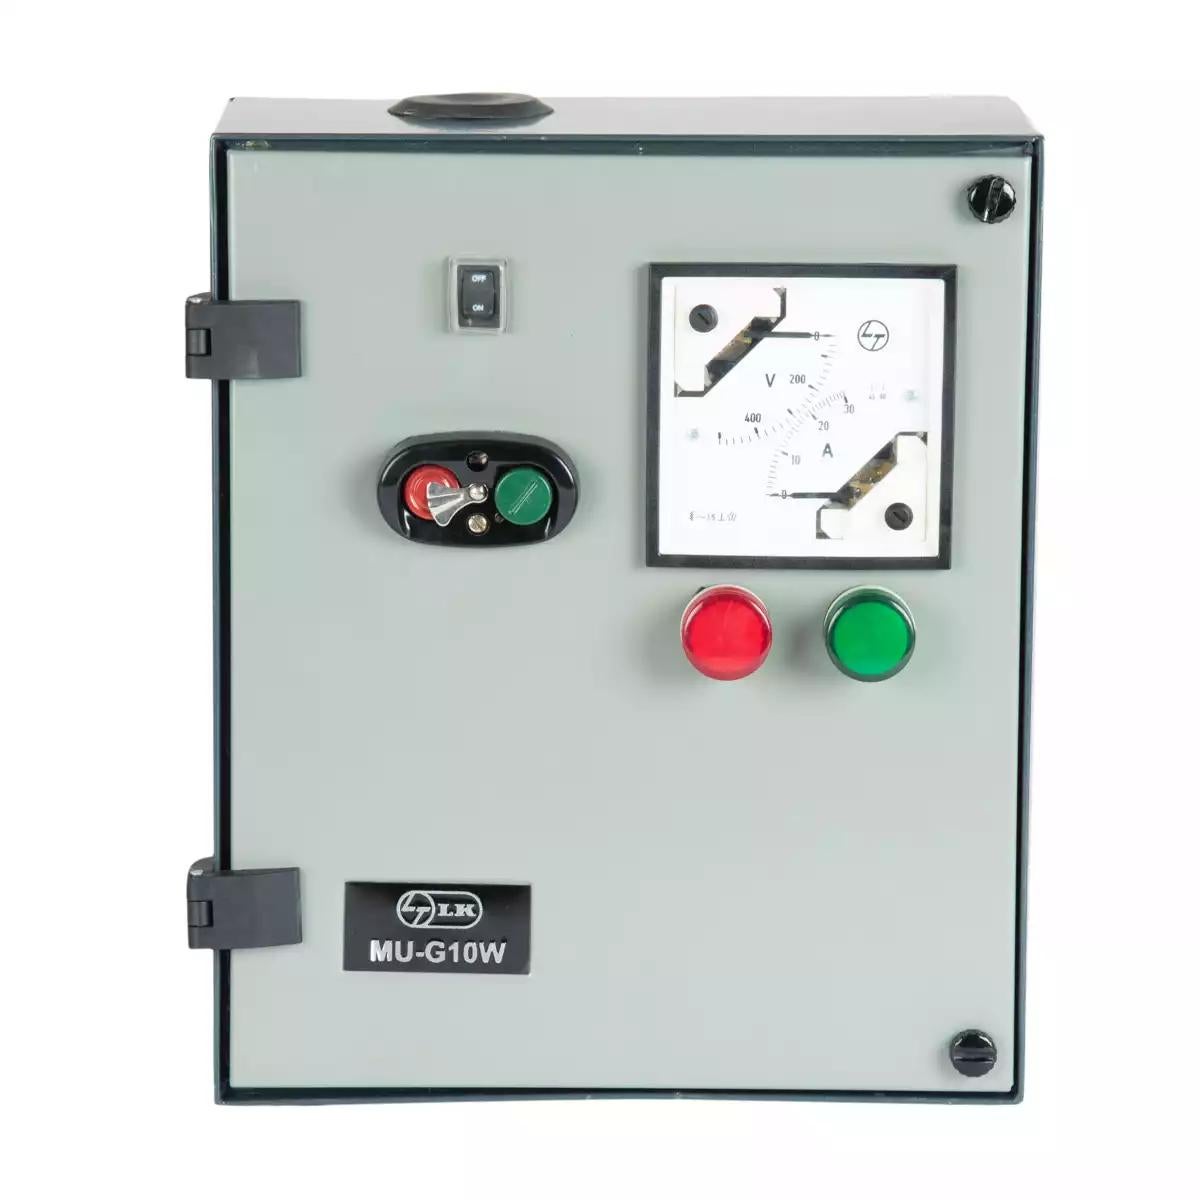 Three Phase DOL Controller with WLC for Submersible Pump Application,MU-G10W,10HP,DOL, CS91037DOEO